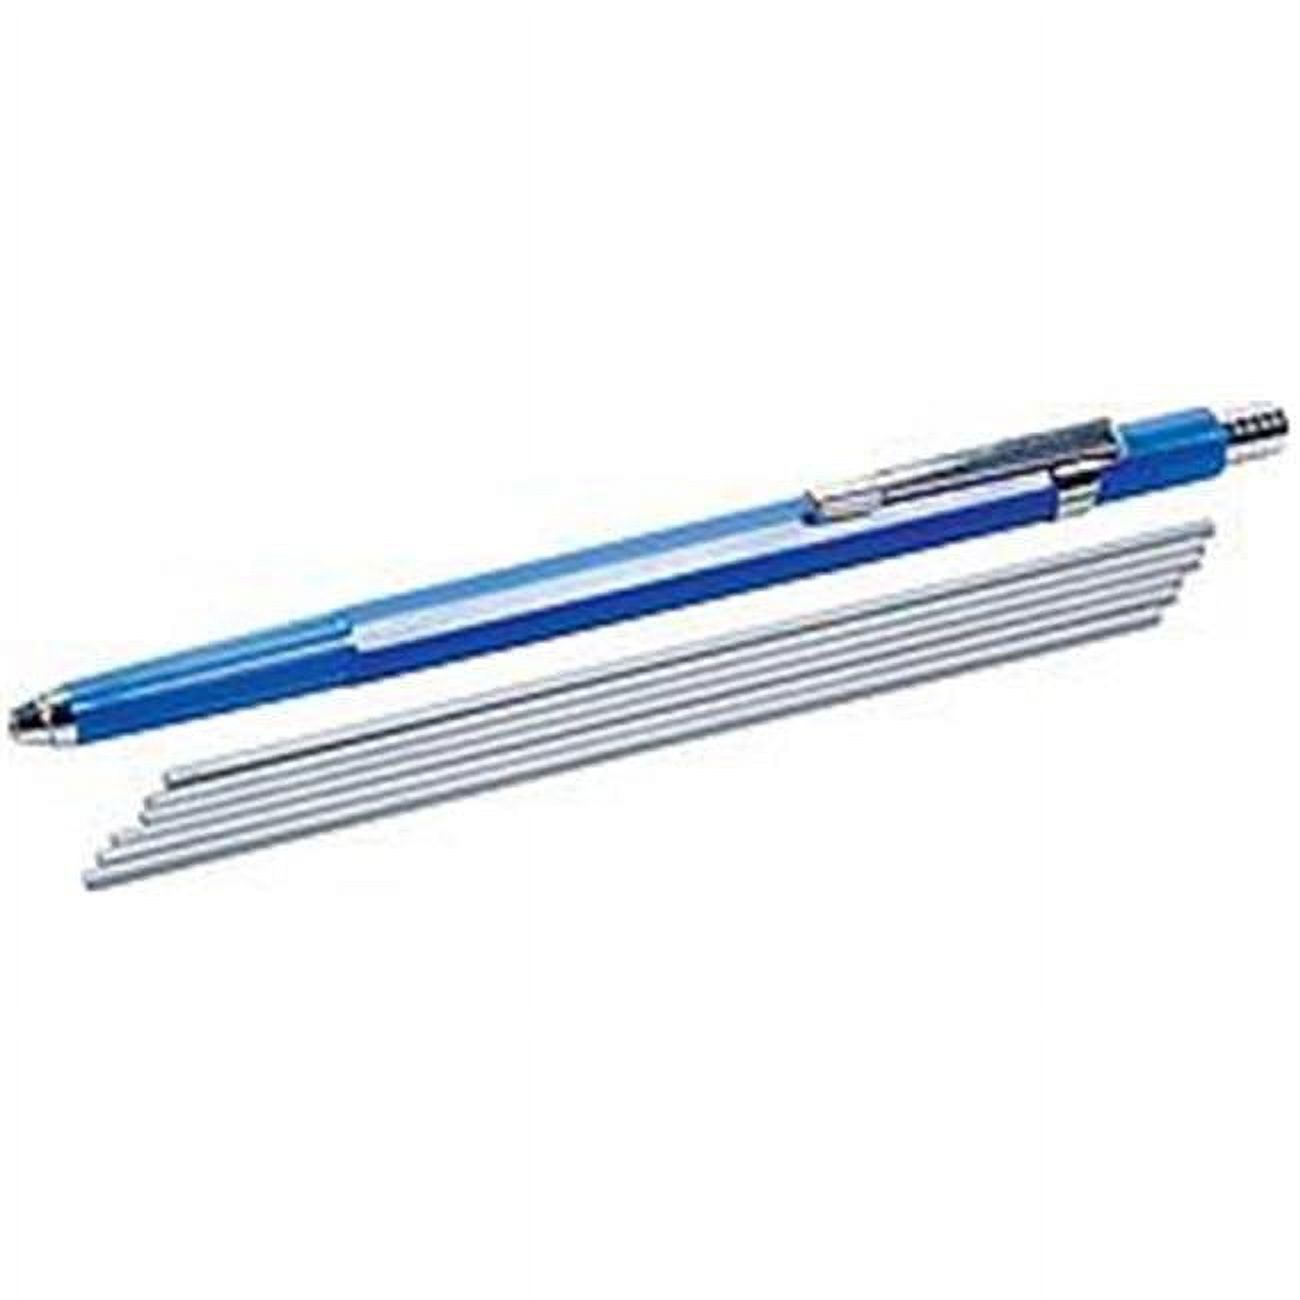 Allstar Performance ALL12066 Mechanical Fabrication Pencil with Six Refills, Silver - image 1 of 4